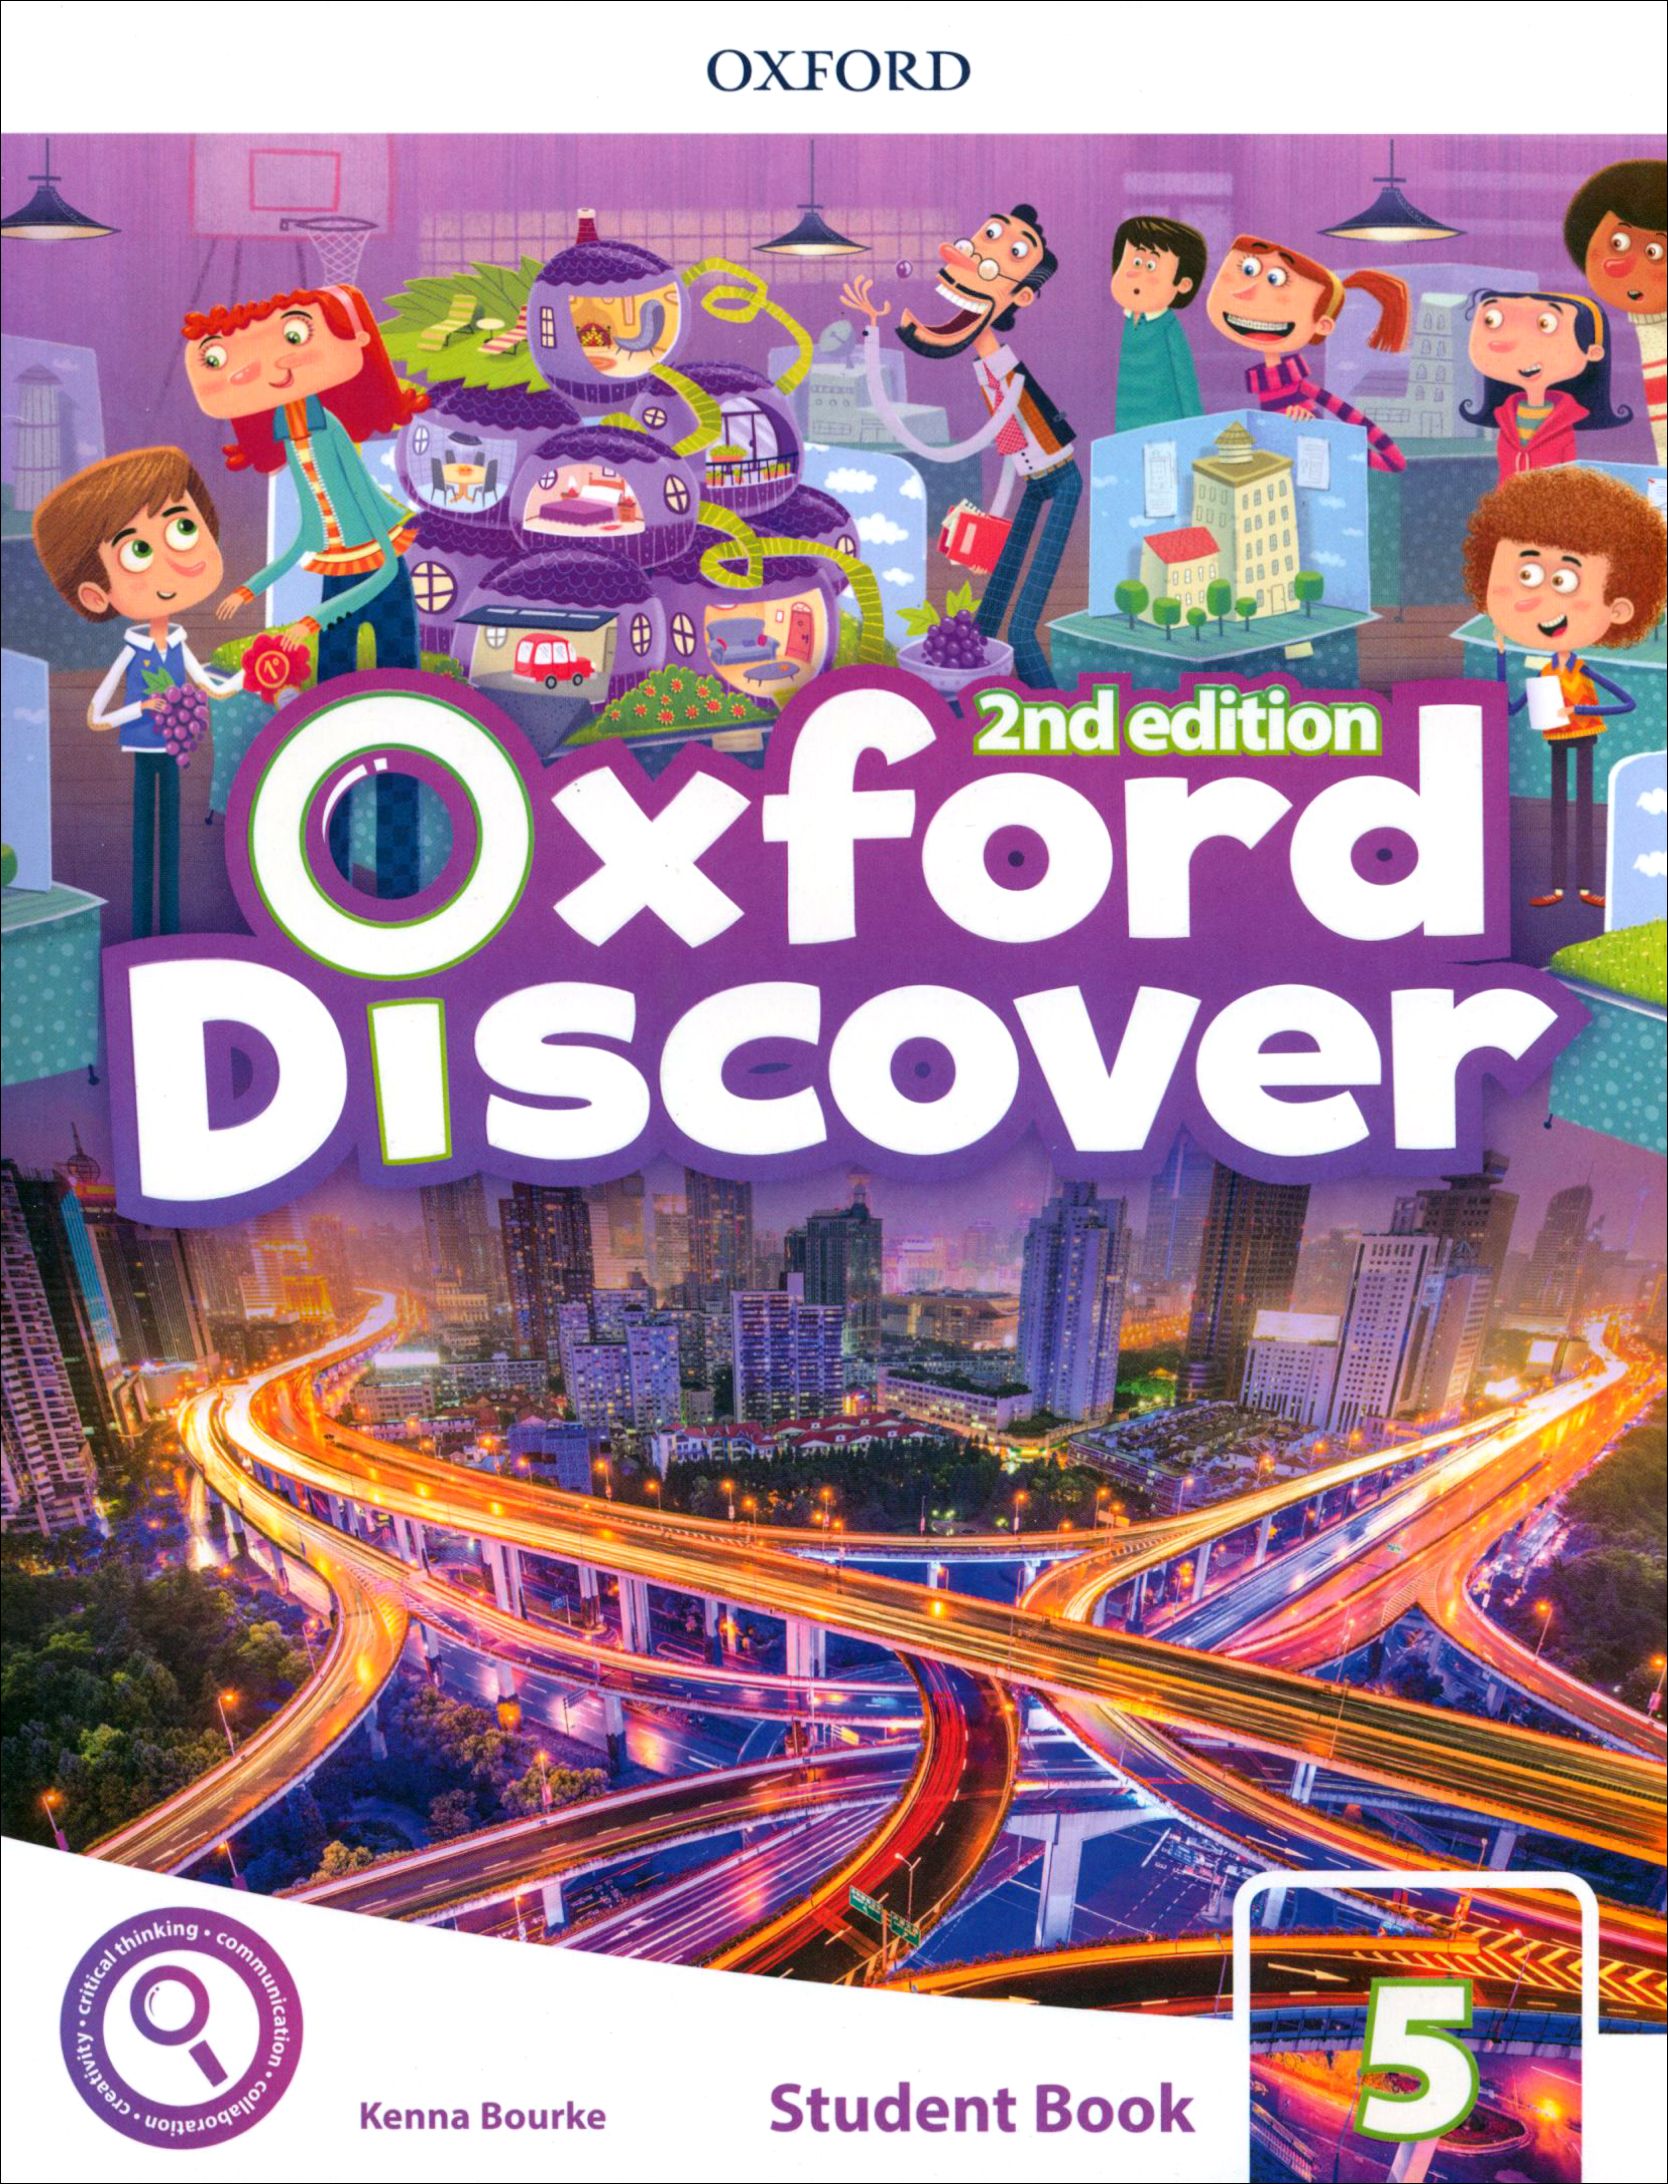 Oxford student s book. Oxford discover 2nd Edition. Oxford discover 5 student book. Oxford discover 5 student's book 2 ND Cover. Oxford discover 2nd Edition 5.